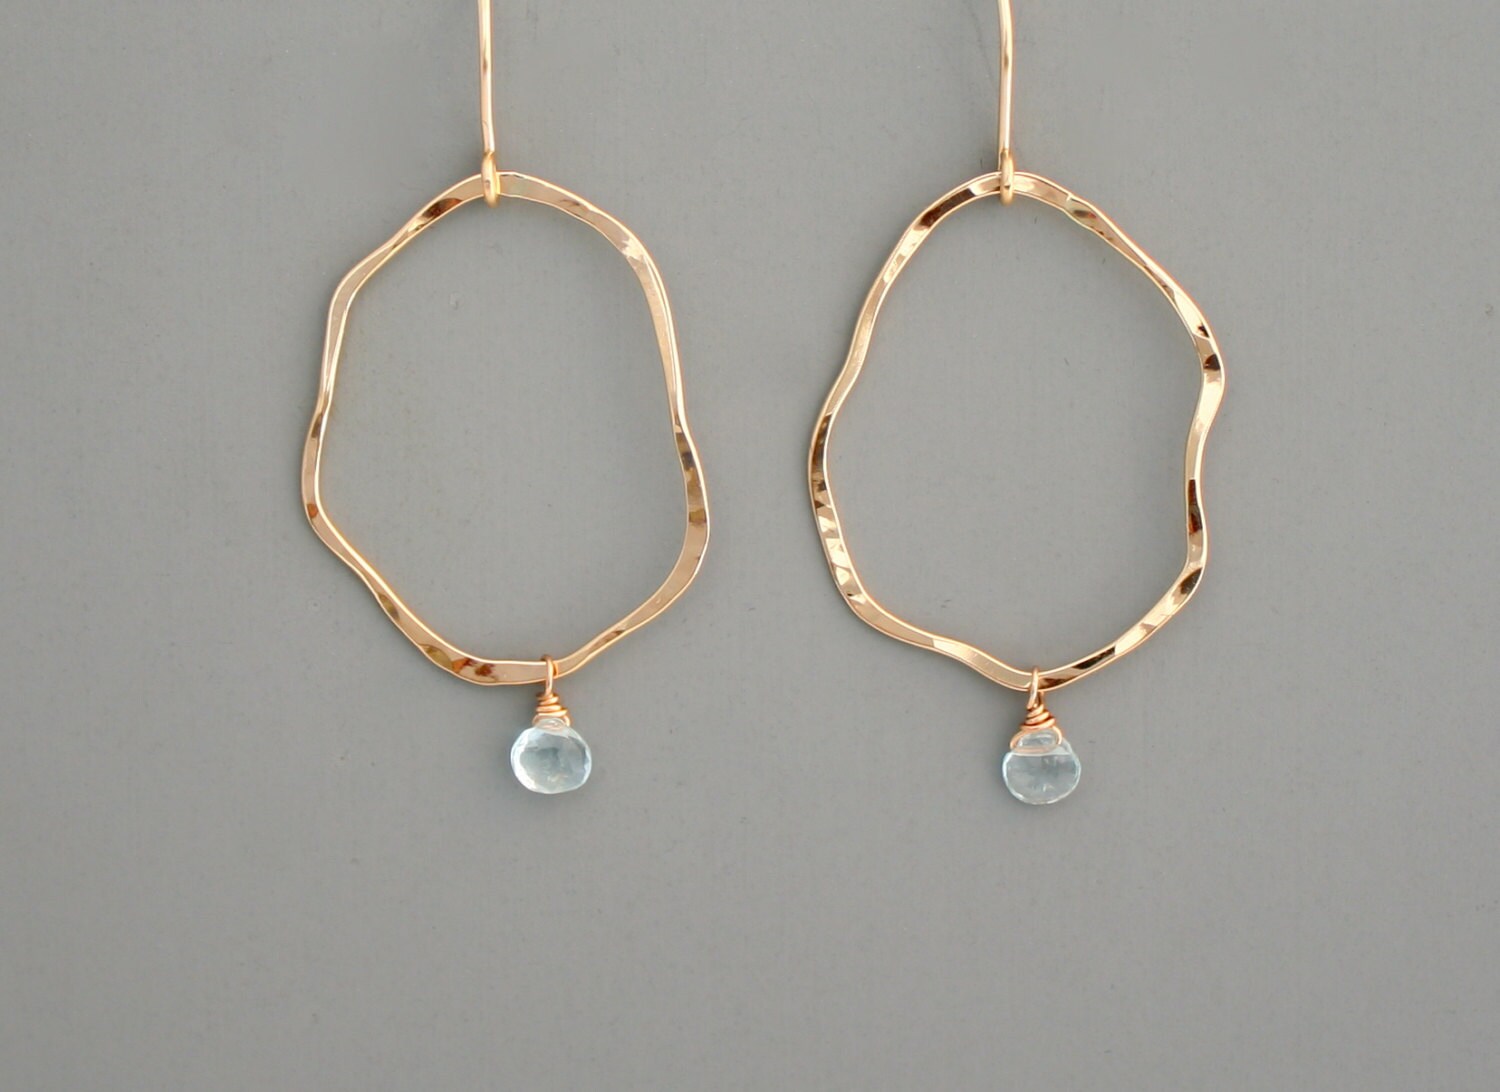 14k Gold filled or sterling silver organic hoop earrings with